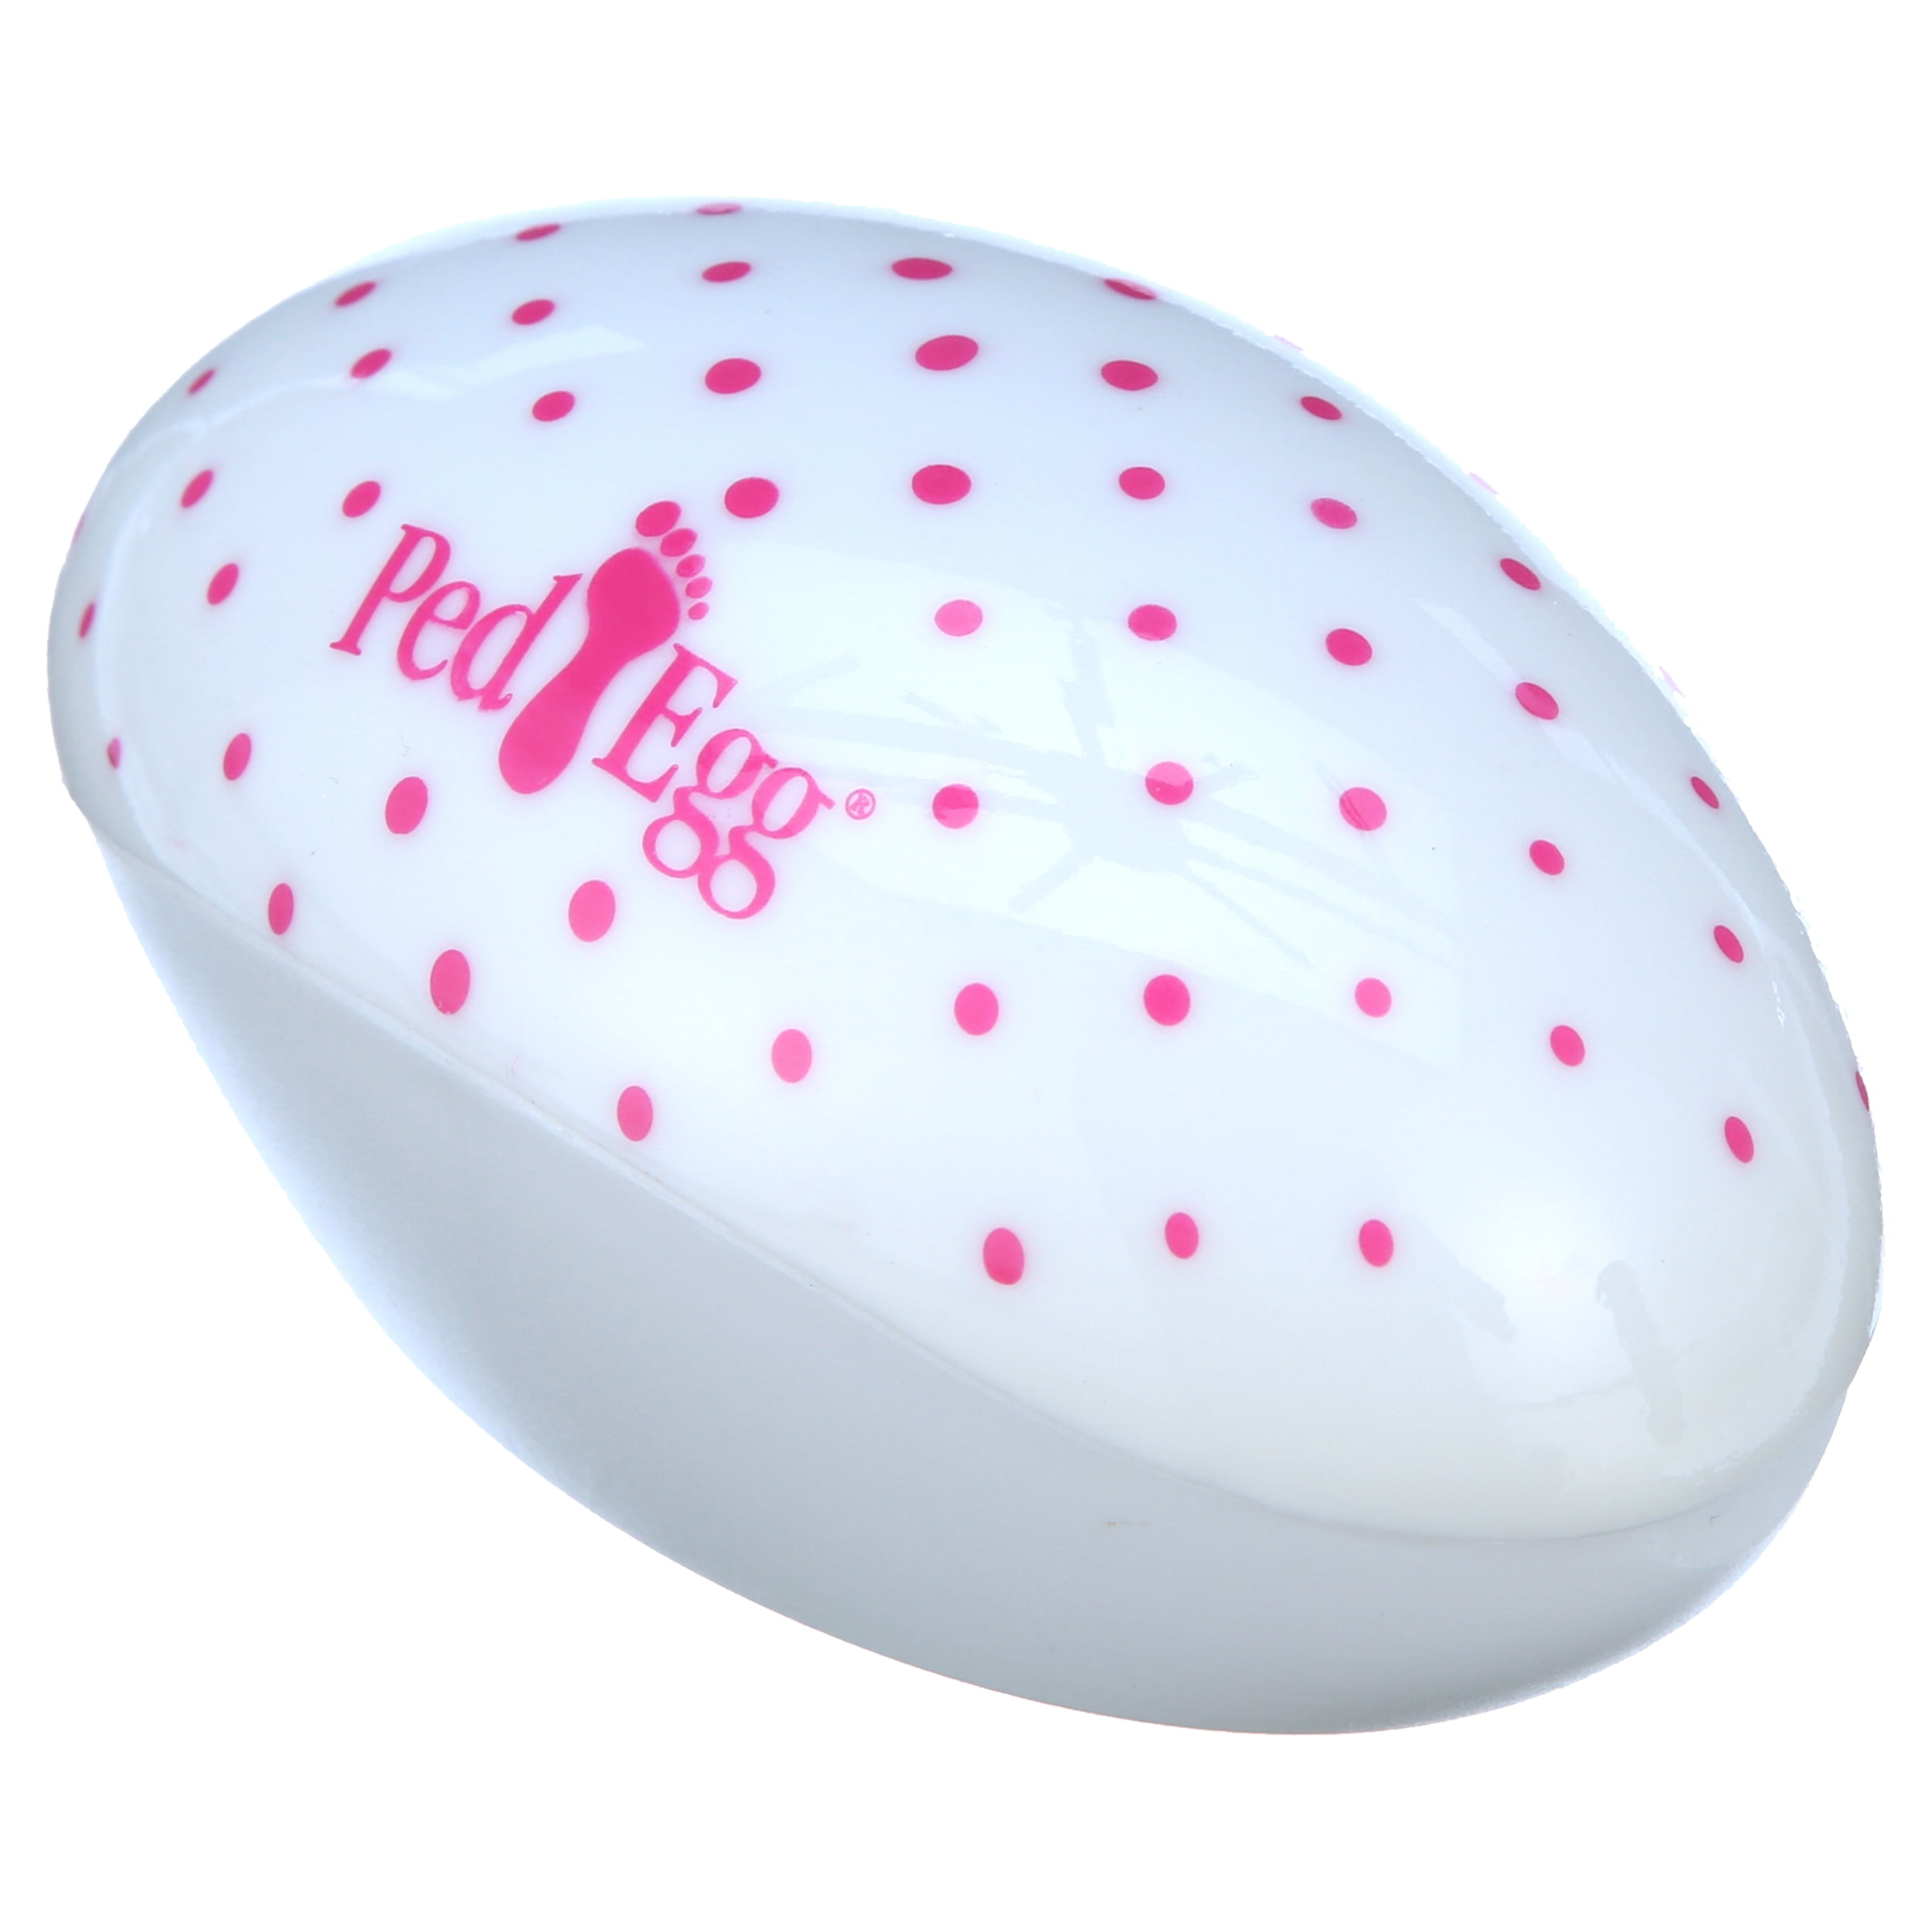 PED EGG FOOT FILE ORIGINAL *N* - Lily's TV Items